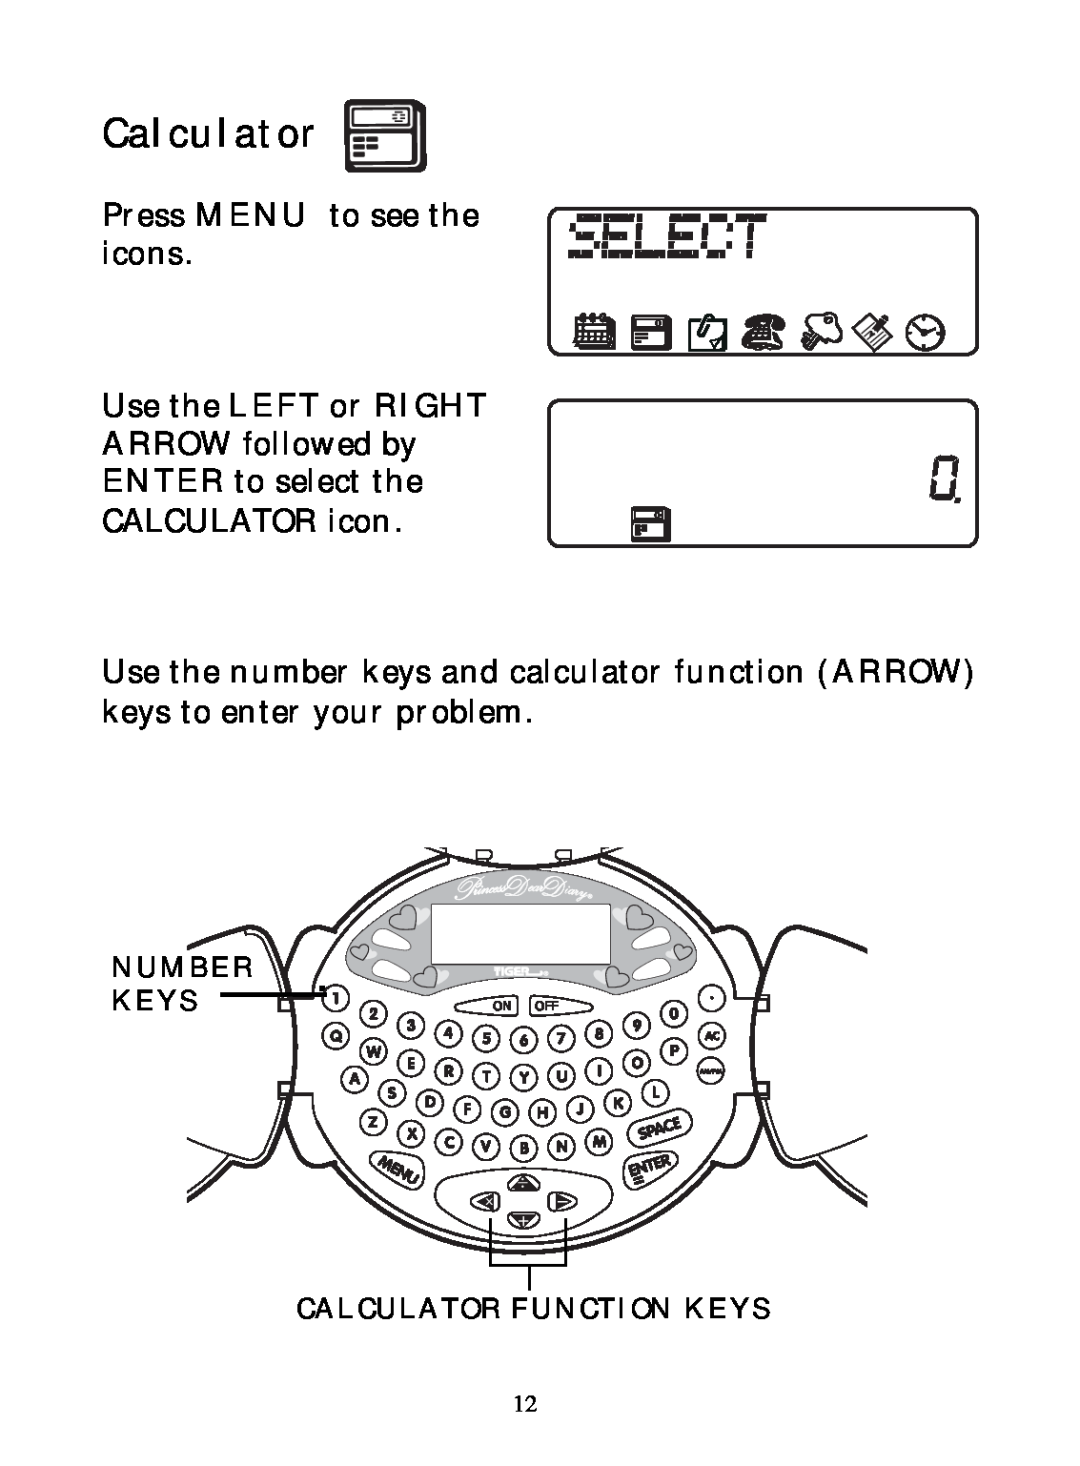 Hasbro 71-554 warranty Calculator, Press MENU to see the icons Use the LEFT or RIGHT ARROW followed by, Number Keys, On Off 